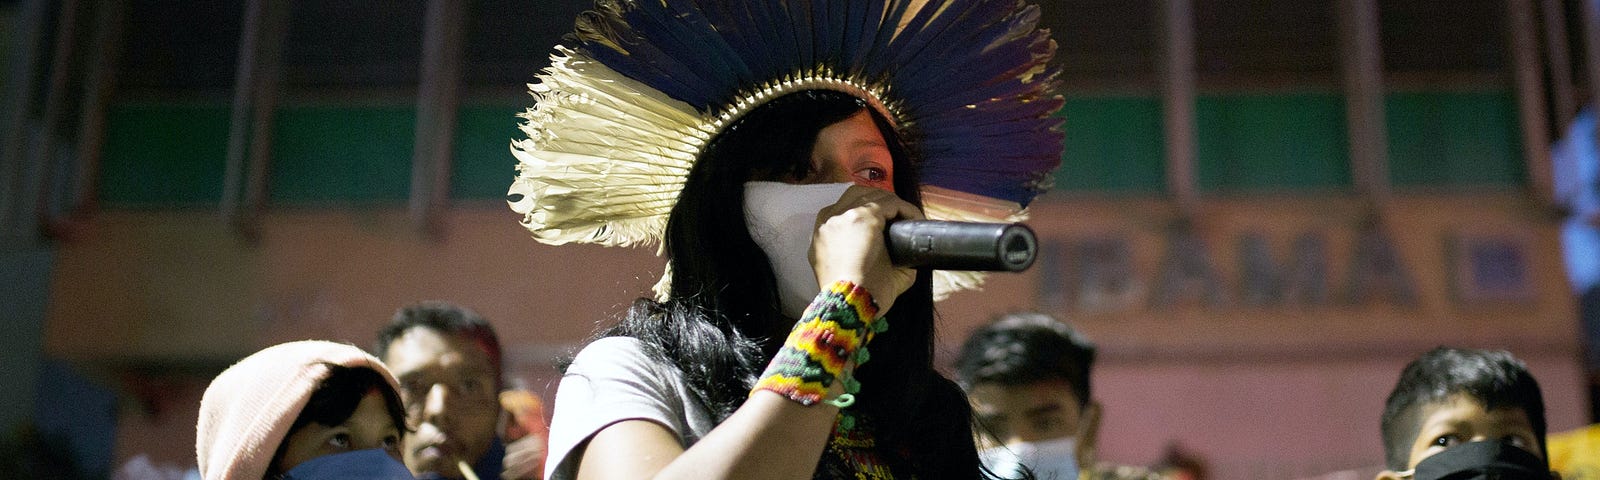 A climate activist holds a microphone among a crowd